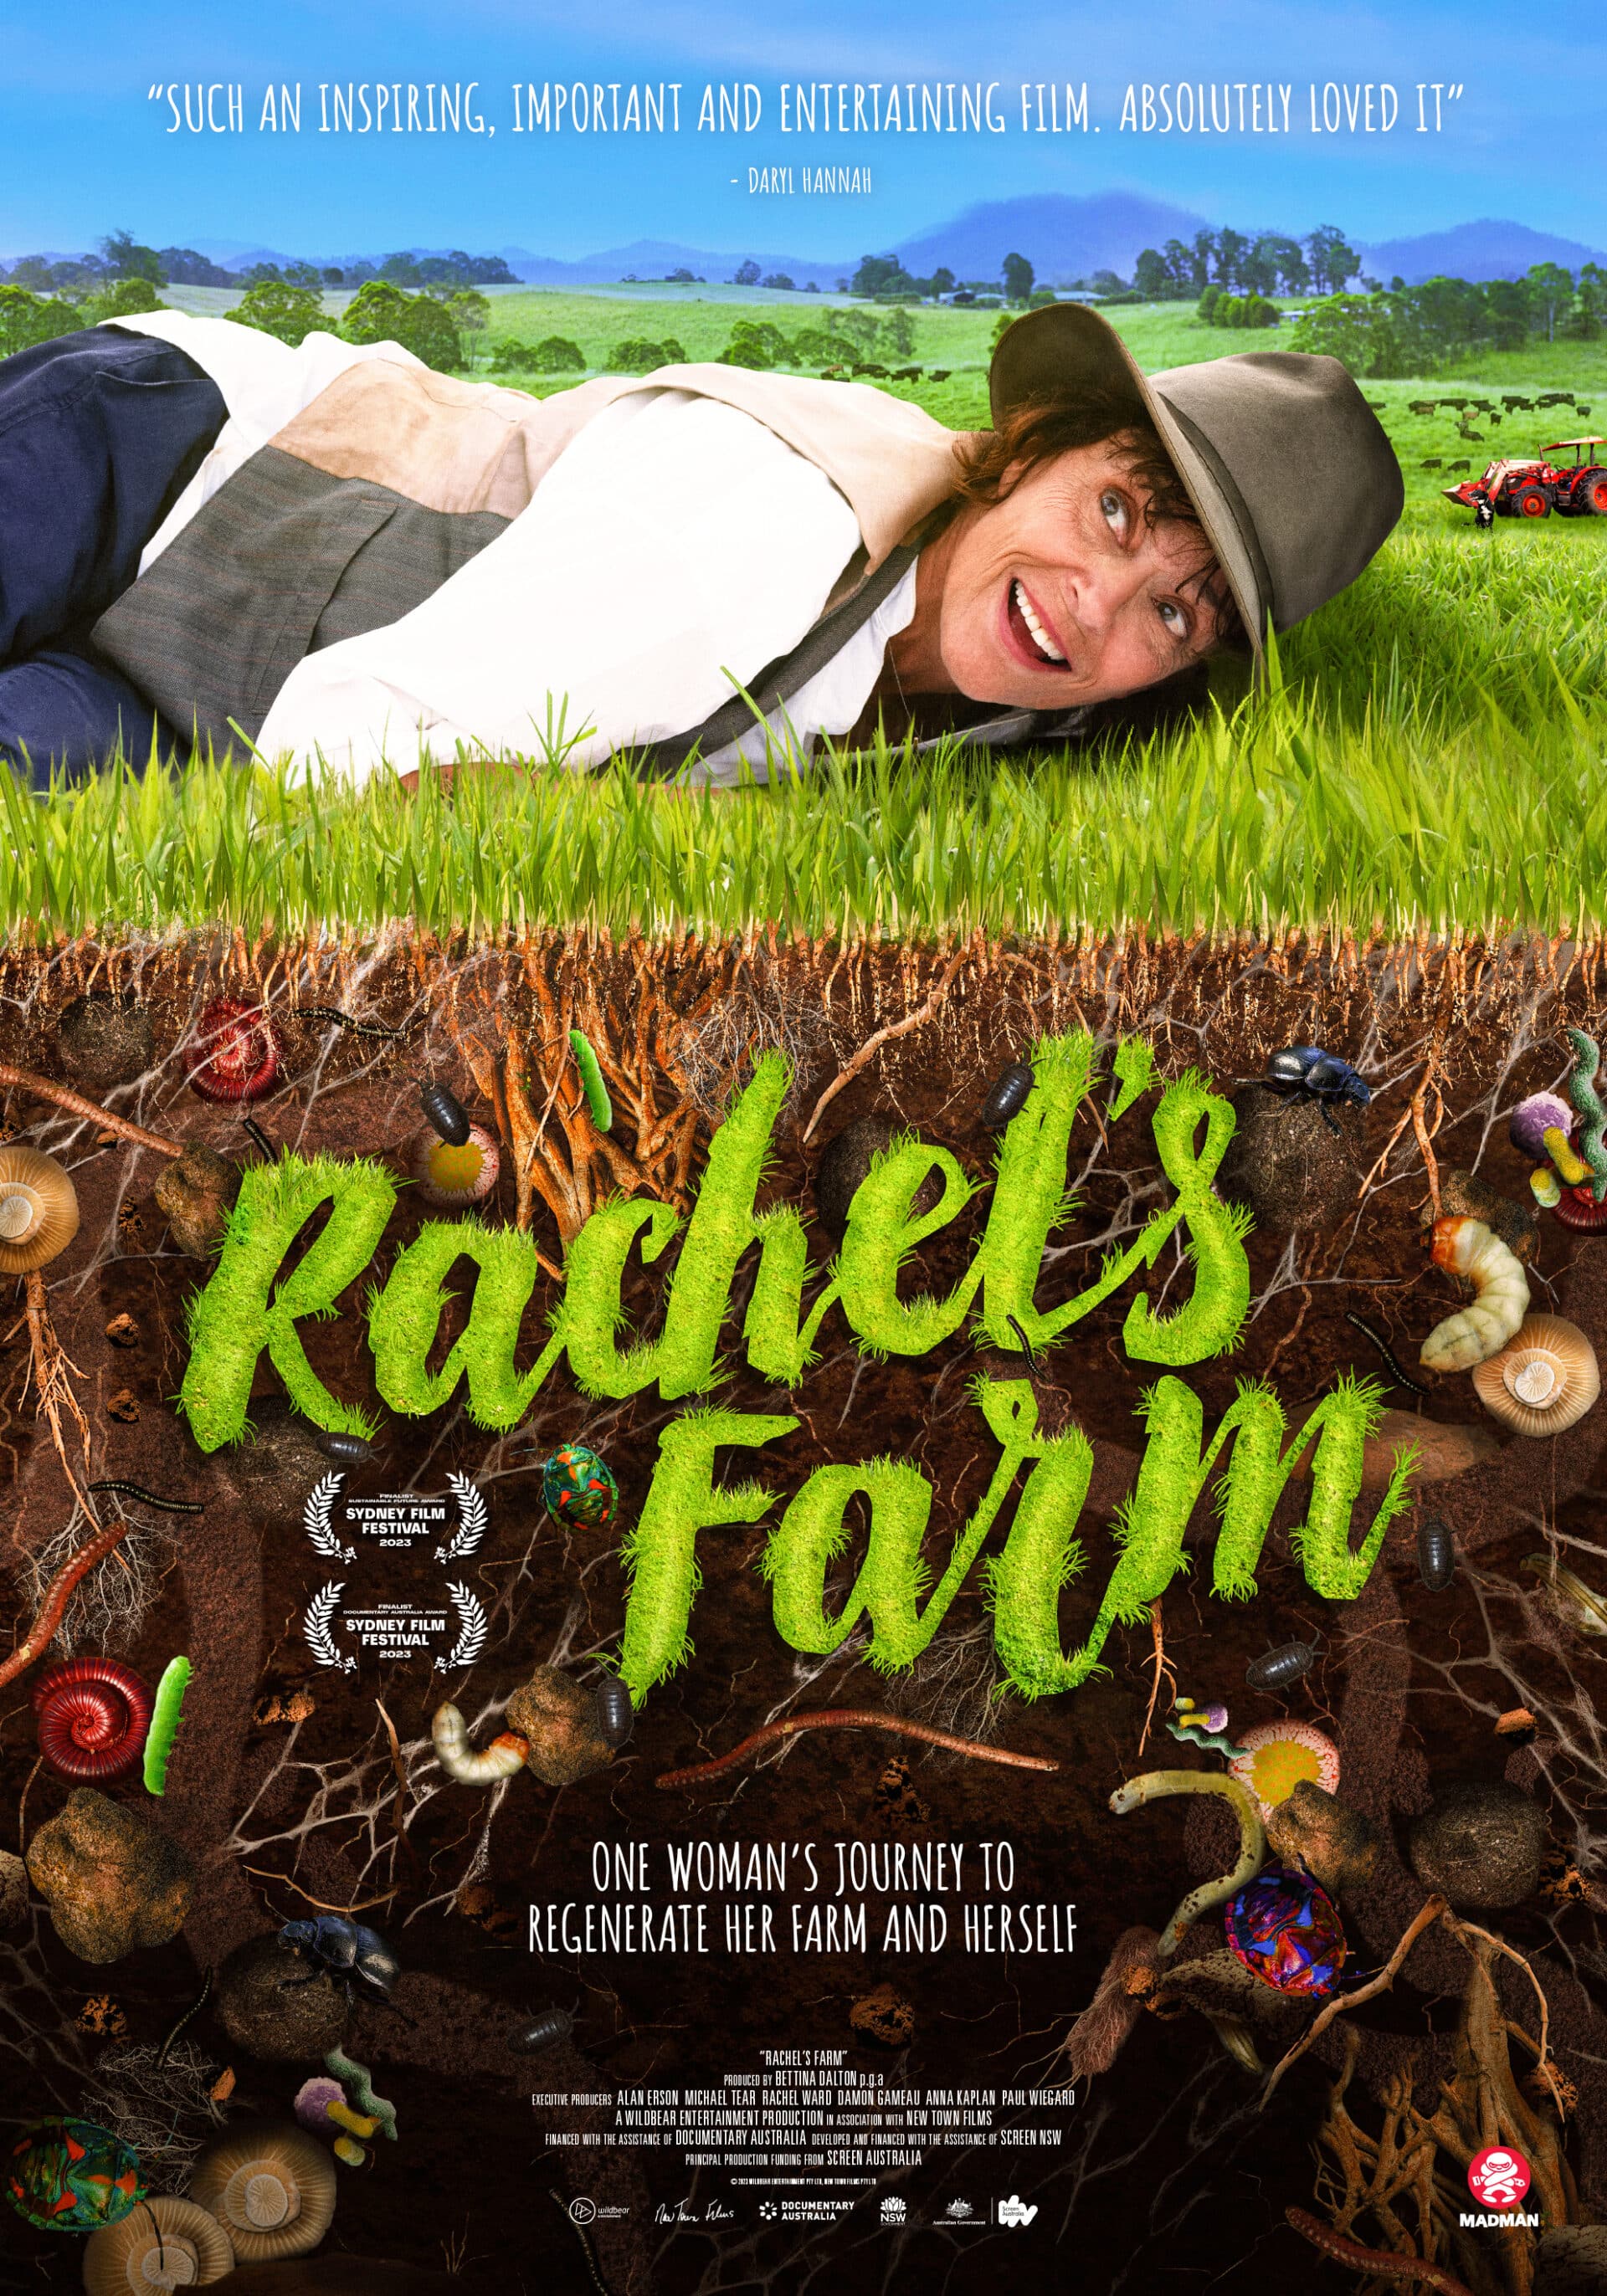 Rachel's Farm, Poster. Foley record & edit completed by Infidel Sudios